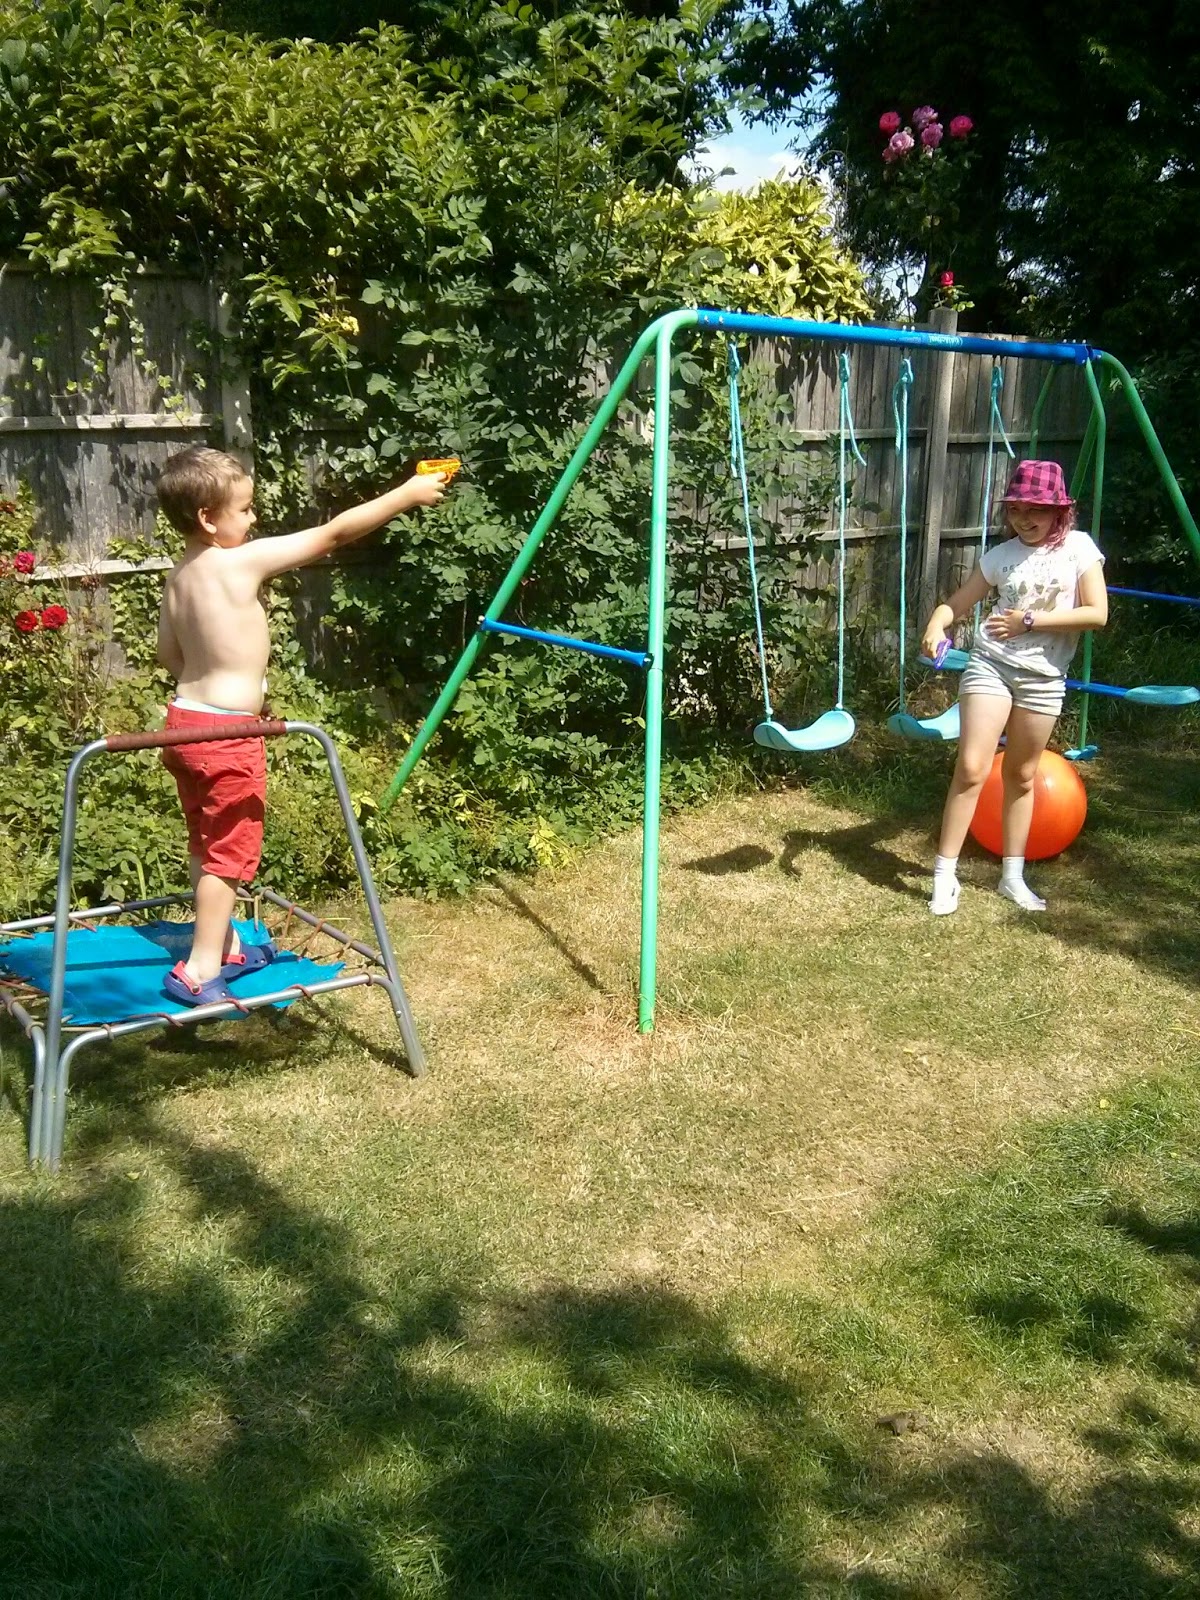 A waterfight between Top Ender and Big Boy